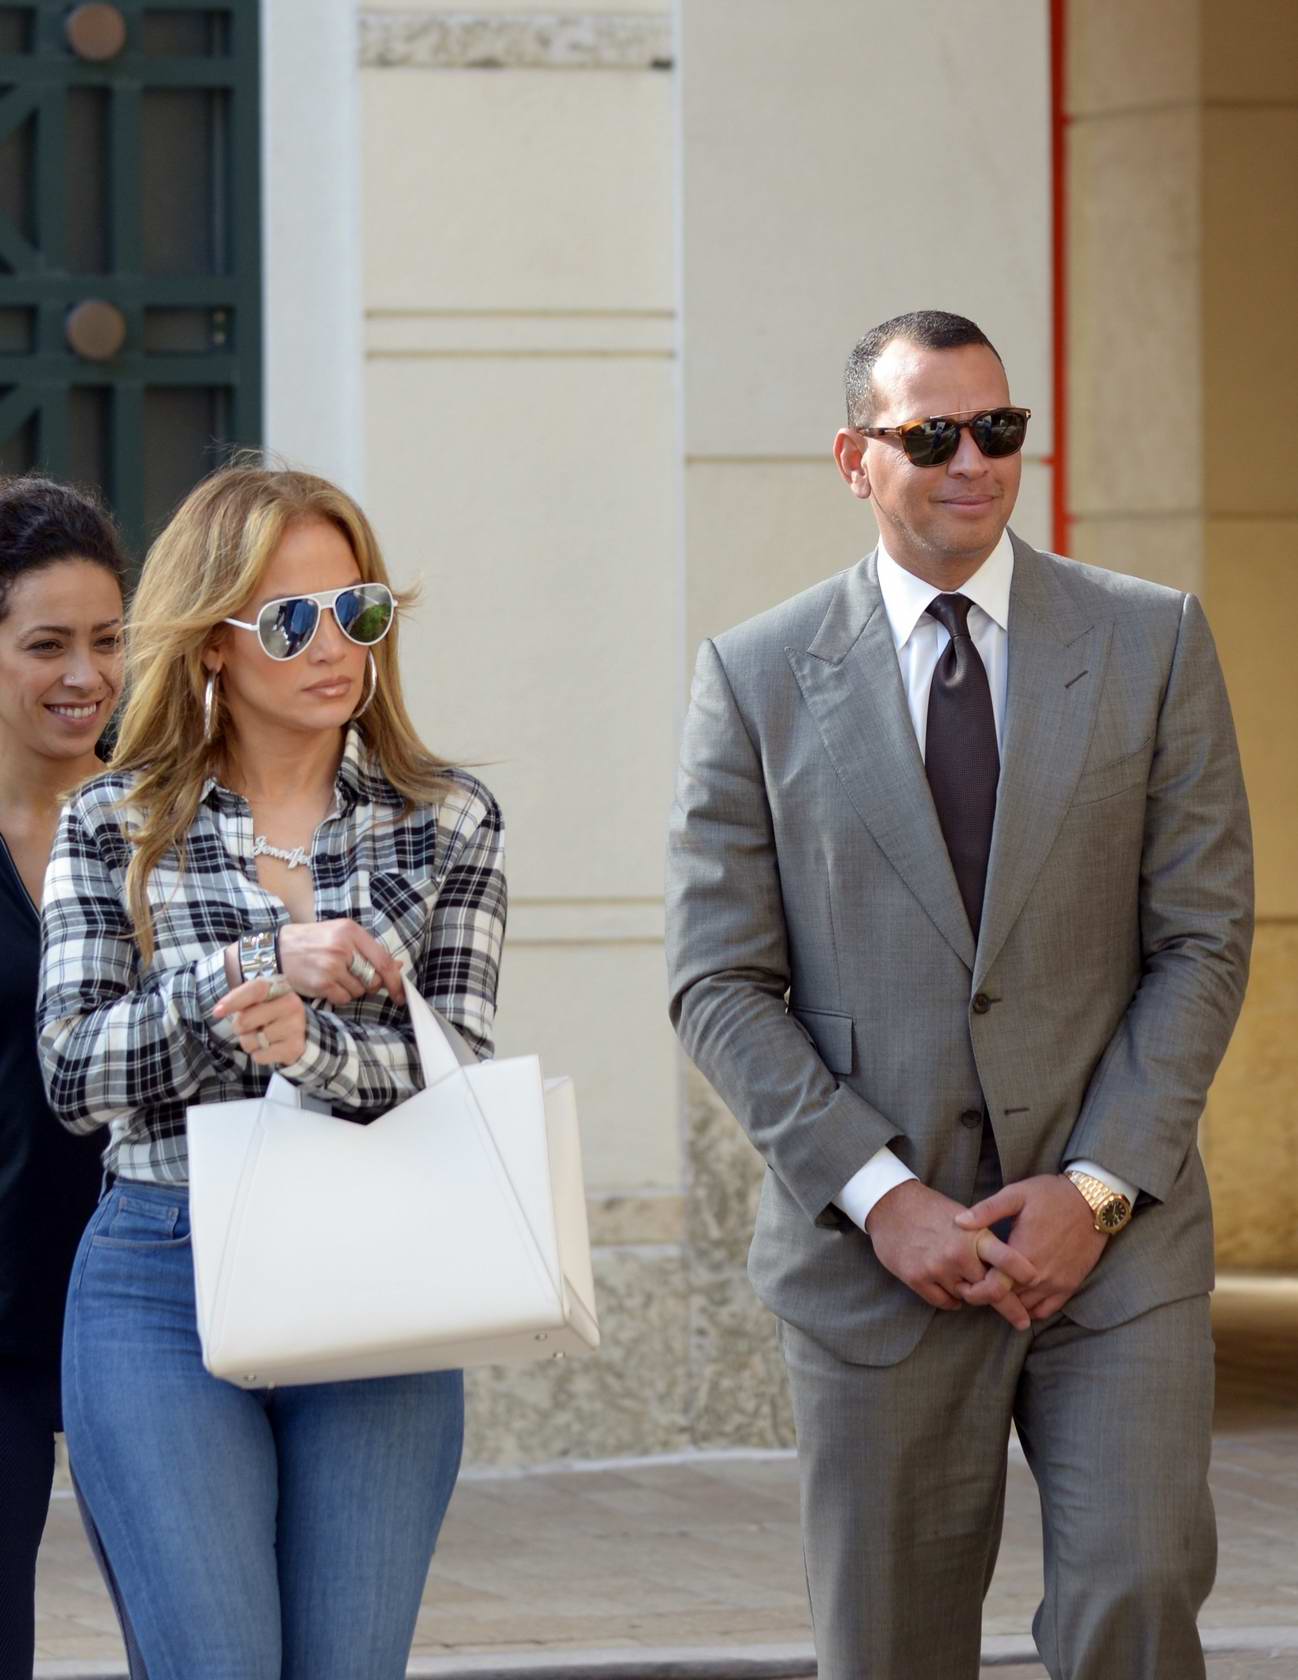 jennifer lopez out for a family lunch with alex rodriguez in miami-150118_09